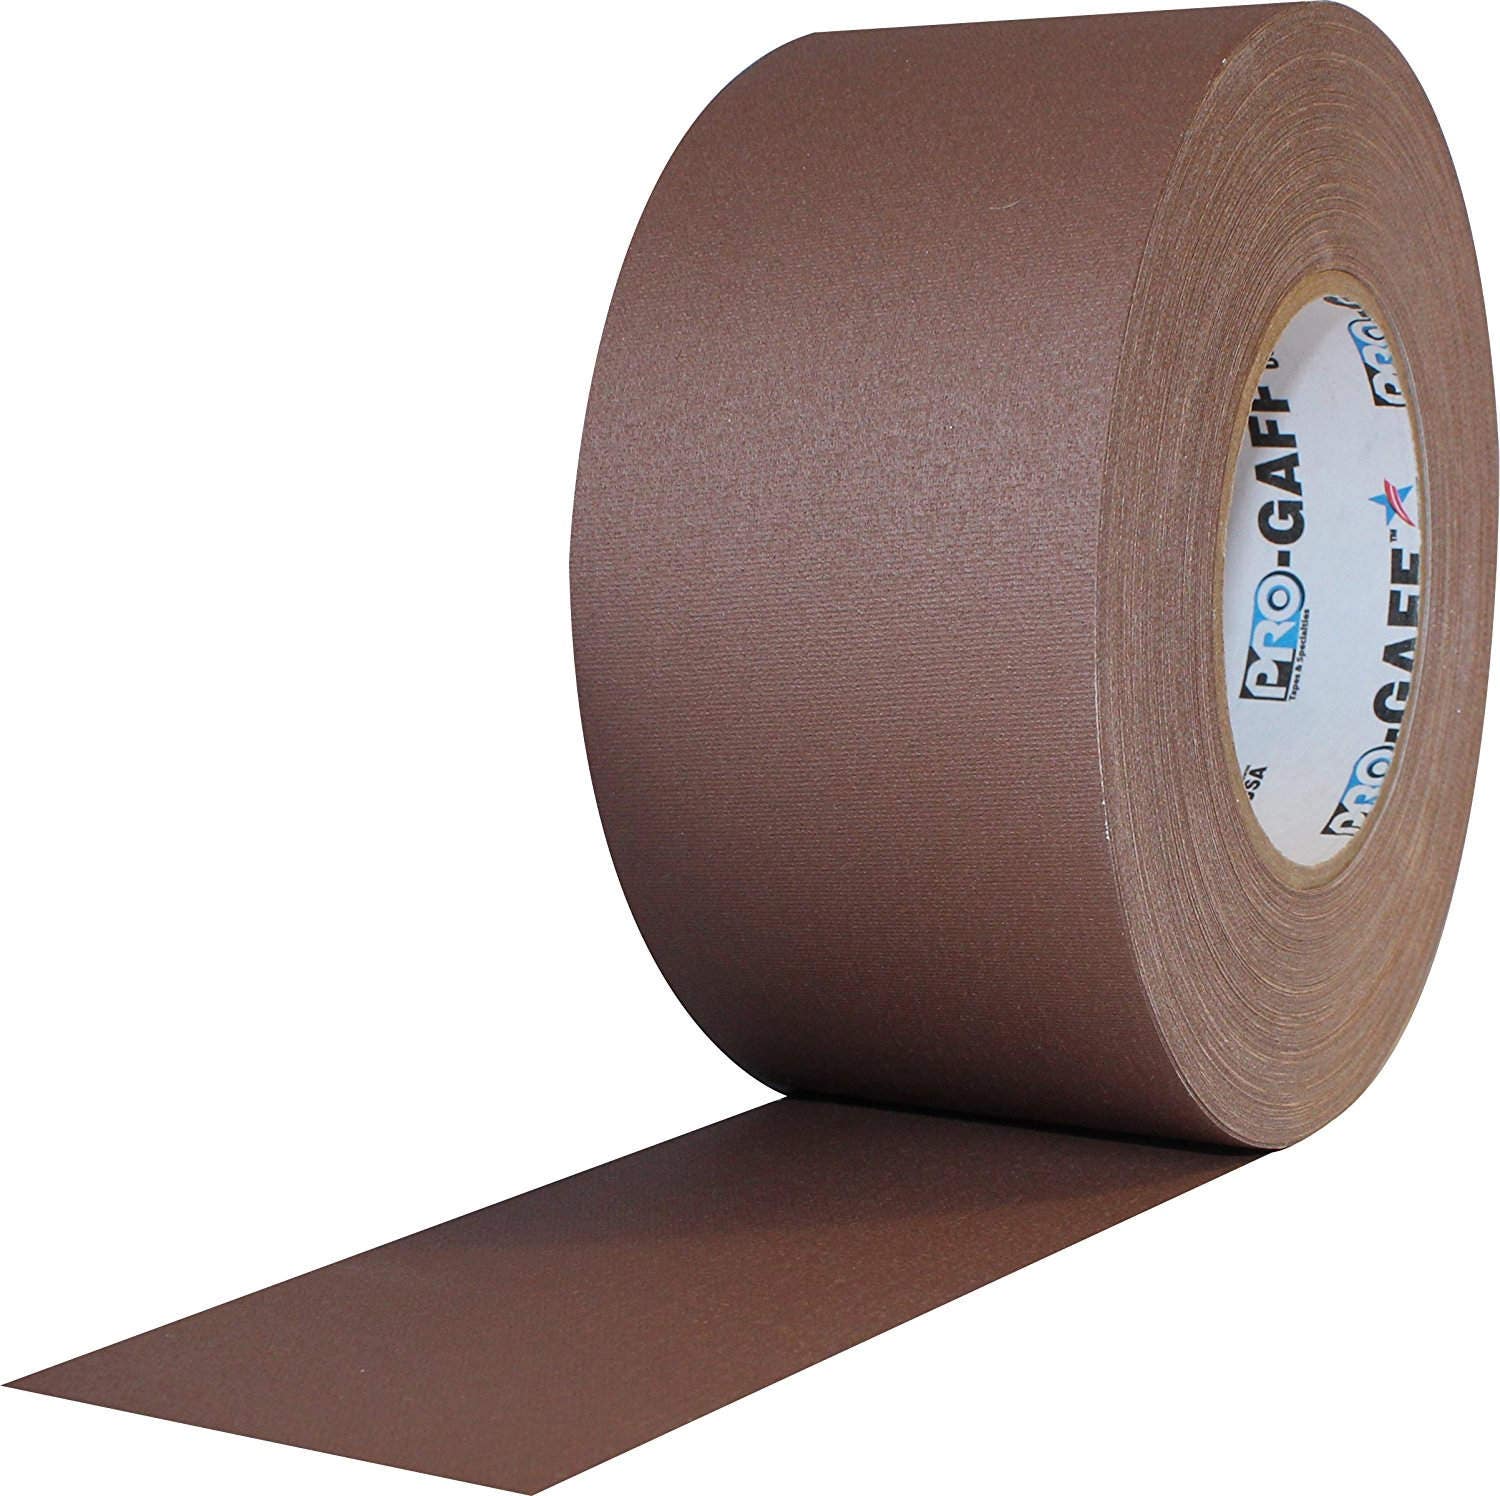 Gaffer Power Real Professional Premium Grade Gaffer Tape Made in The USA - Brown 3 inch x 30 Yards - Heavy Duty Gaffers Tape - Non-Reflective - Multip